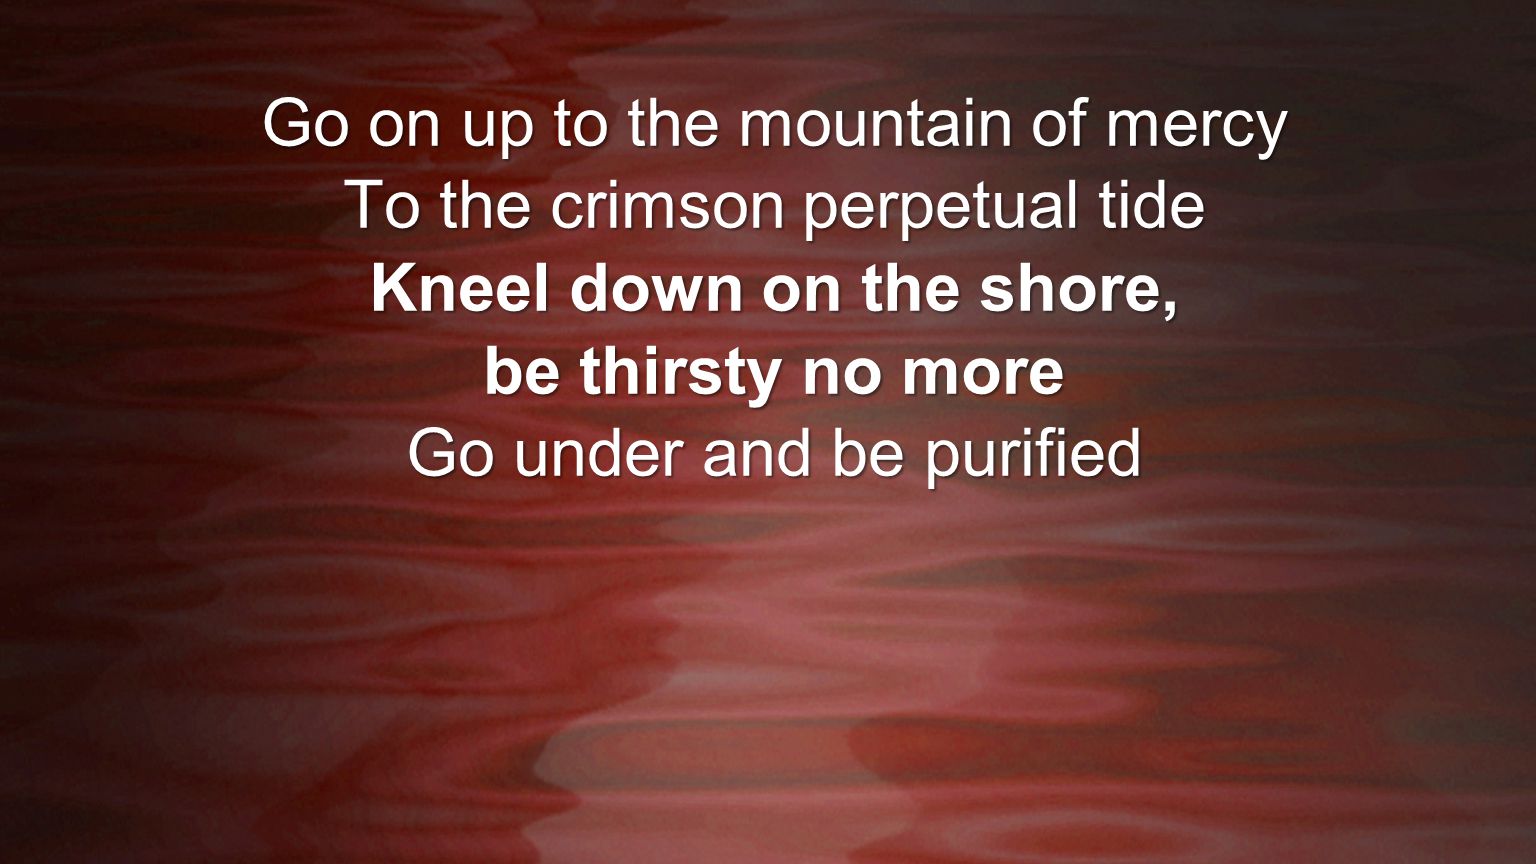 Kneel down on the shore, be thirsty no more